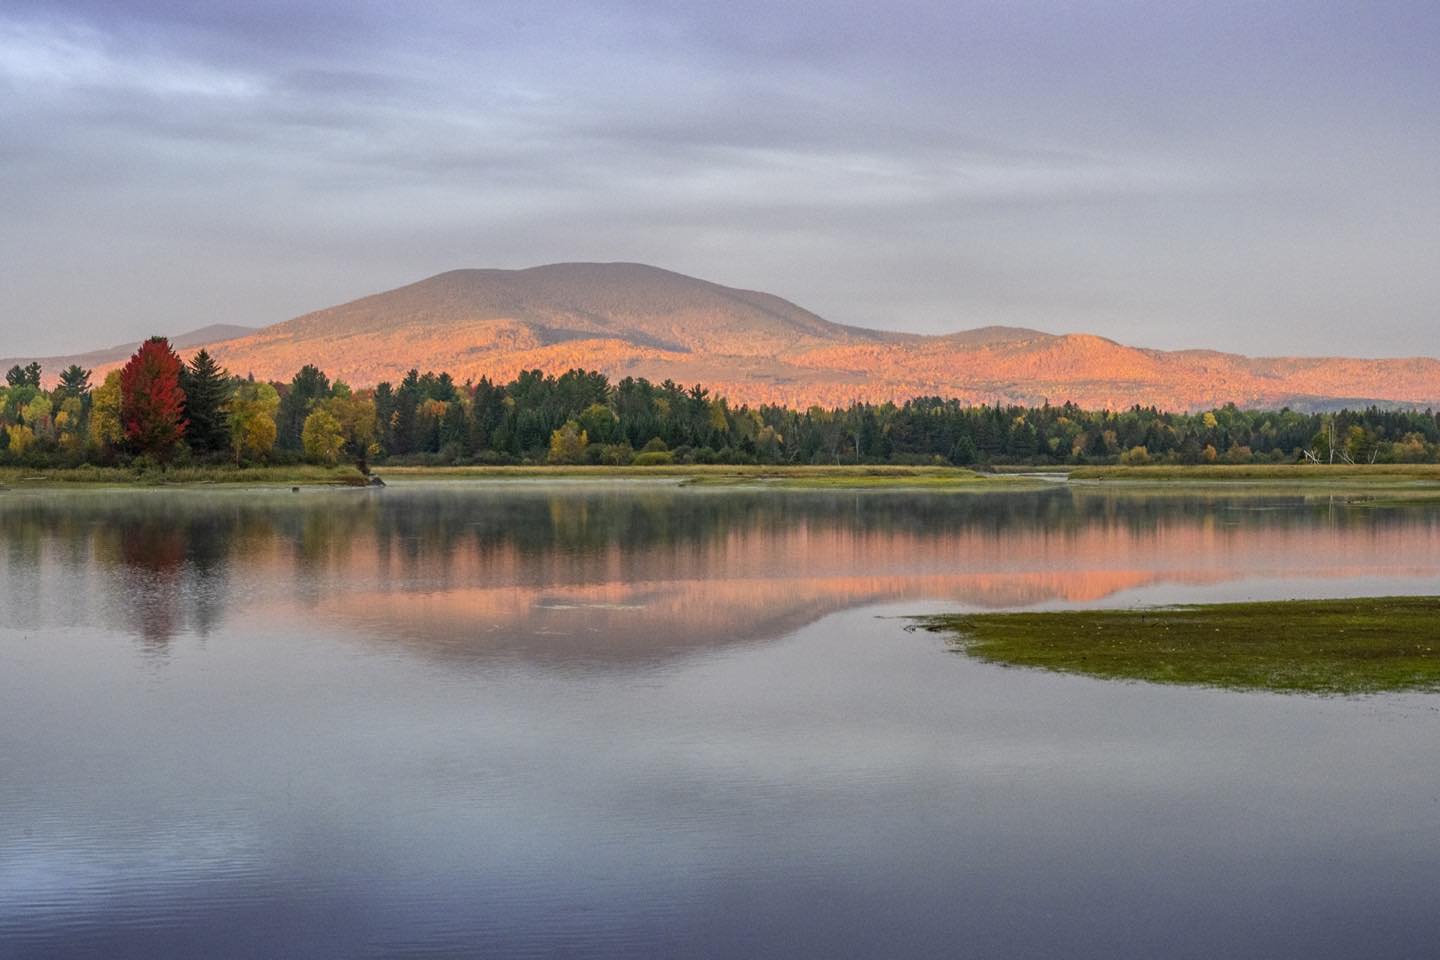 Early morning mountain light illuminates East Kennebago Mountain, photographed from the Flagstaff Lake Causeway in Stratton, Maine. Cindy Orcutt recorded the fleeting moment just before the narrow gap in the low clouds closed. #eastkennebagomountain #strattonmaine #flagstafflake #orcuttphotography.com #fallphotographyinmaine